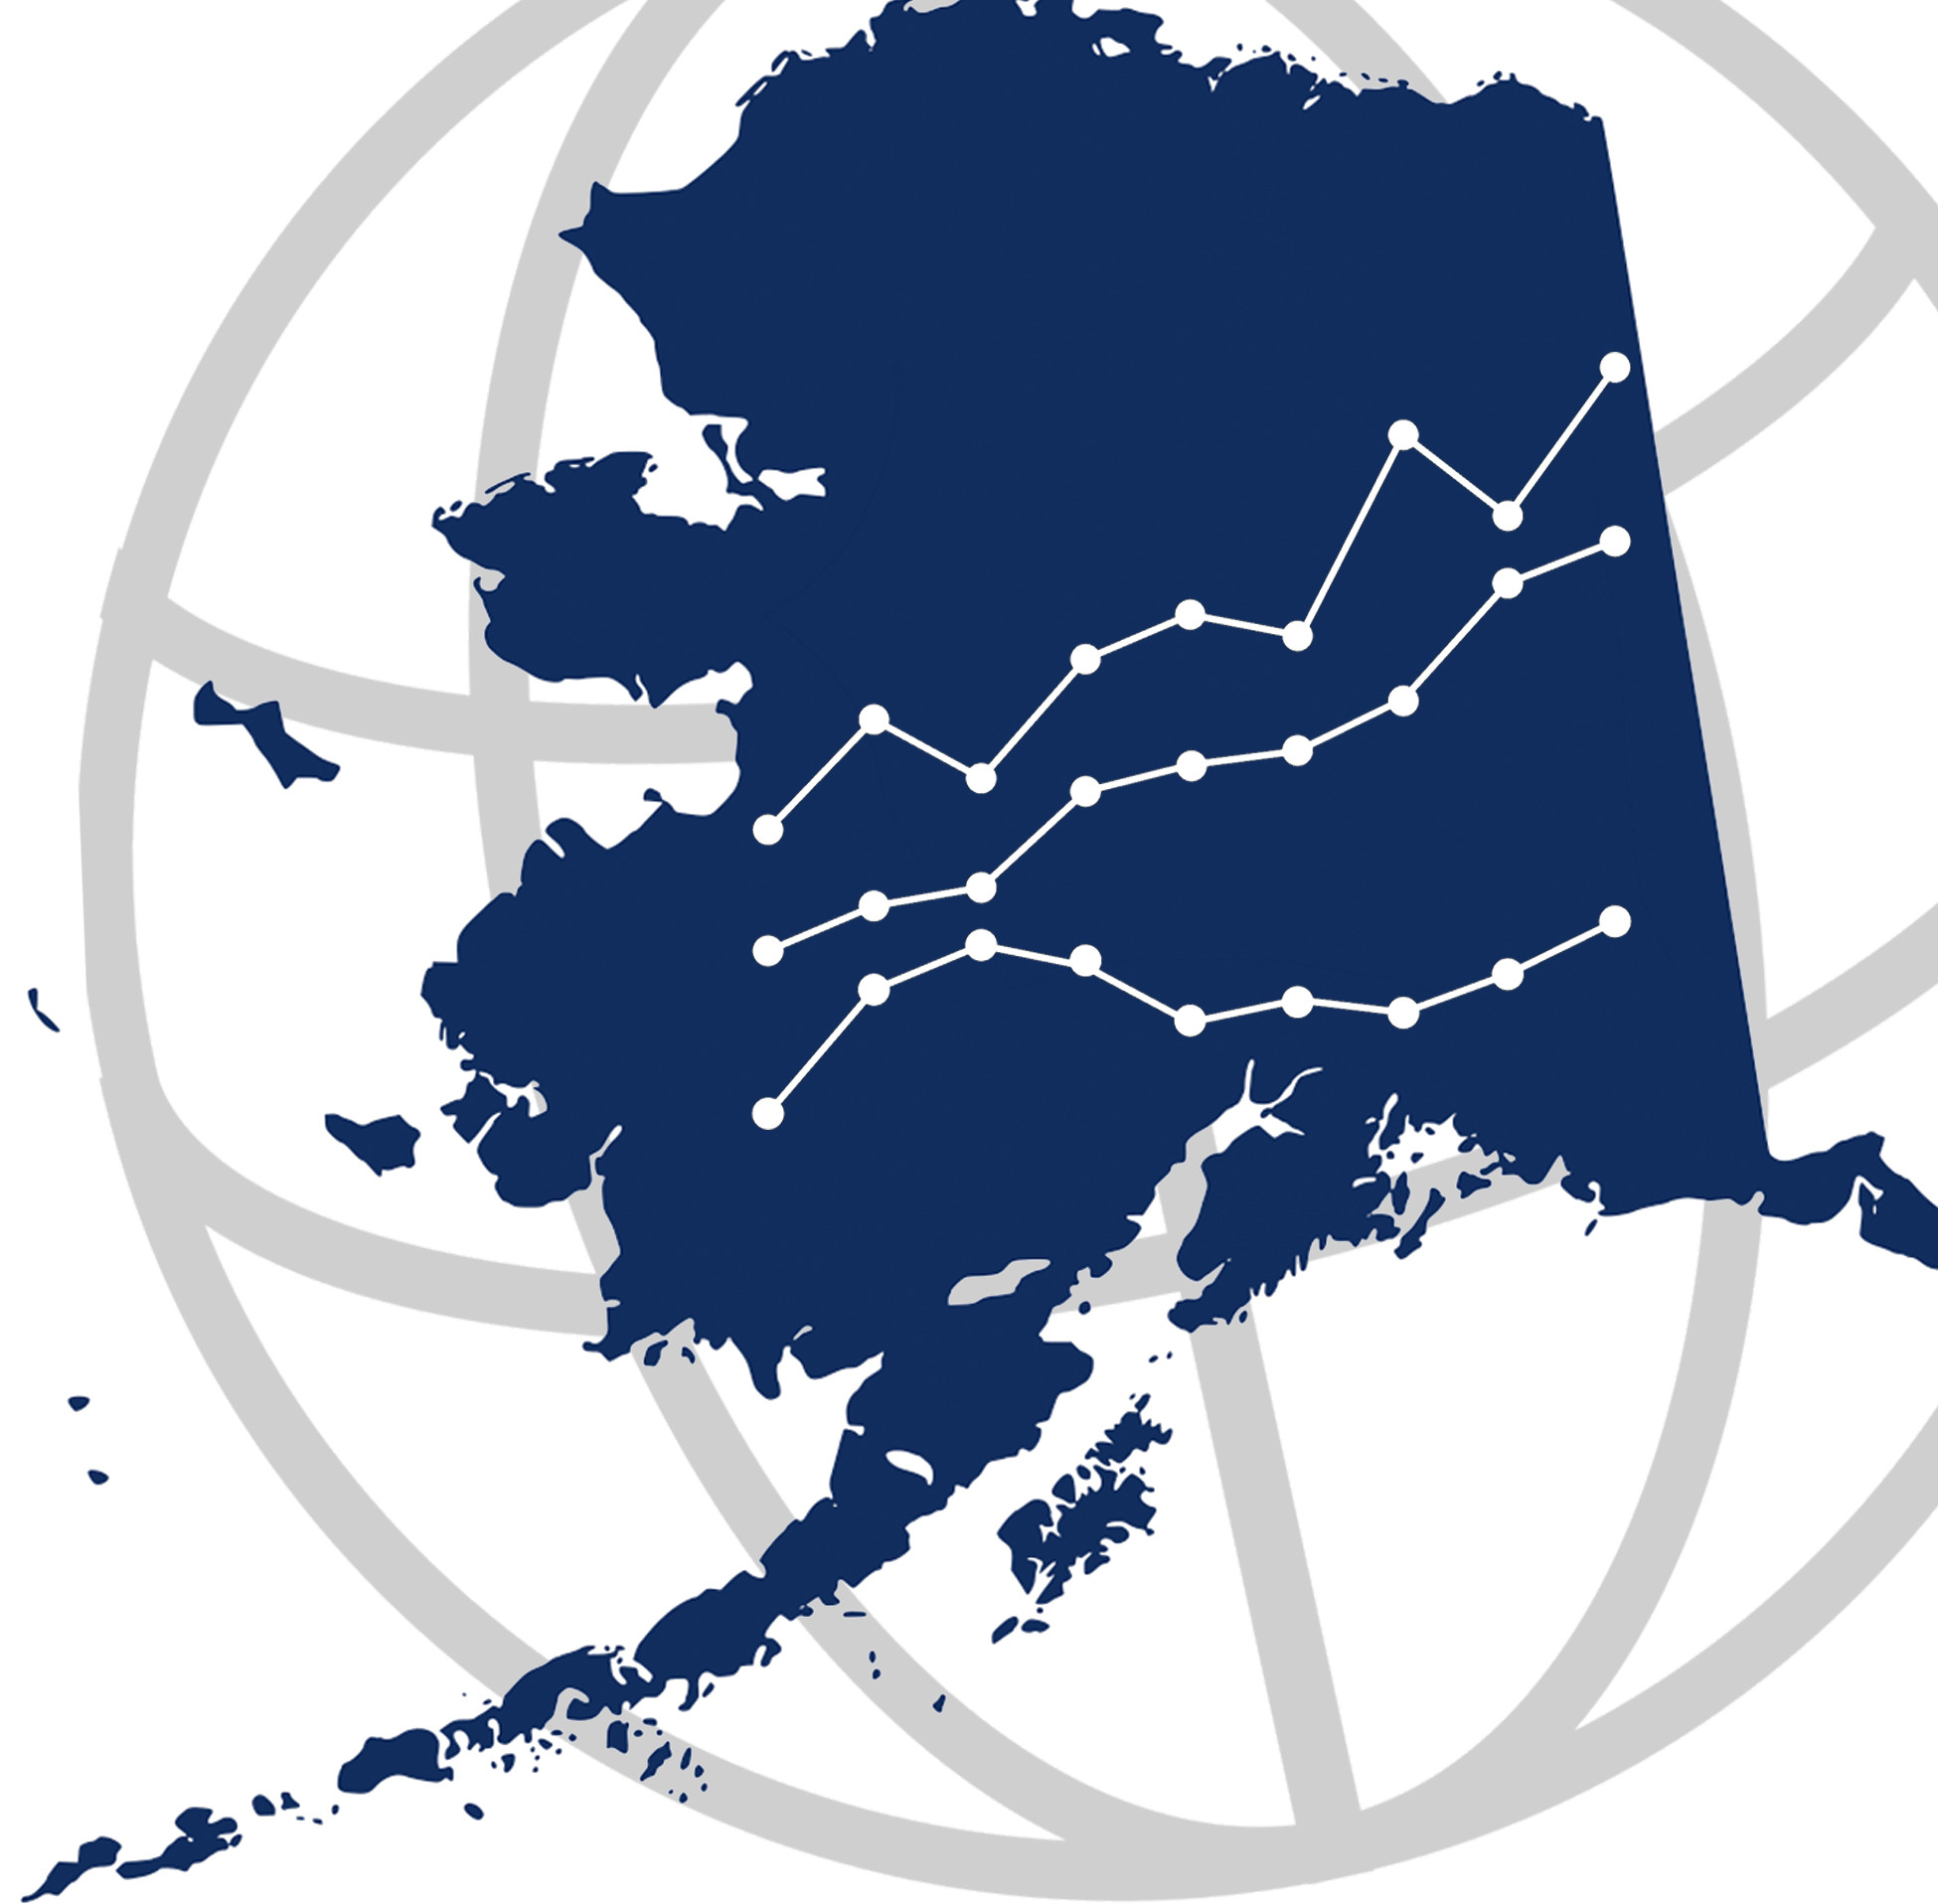 "Alaska's Global Economy: Where We've Been and Where We're Going" - A Panel Discussion